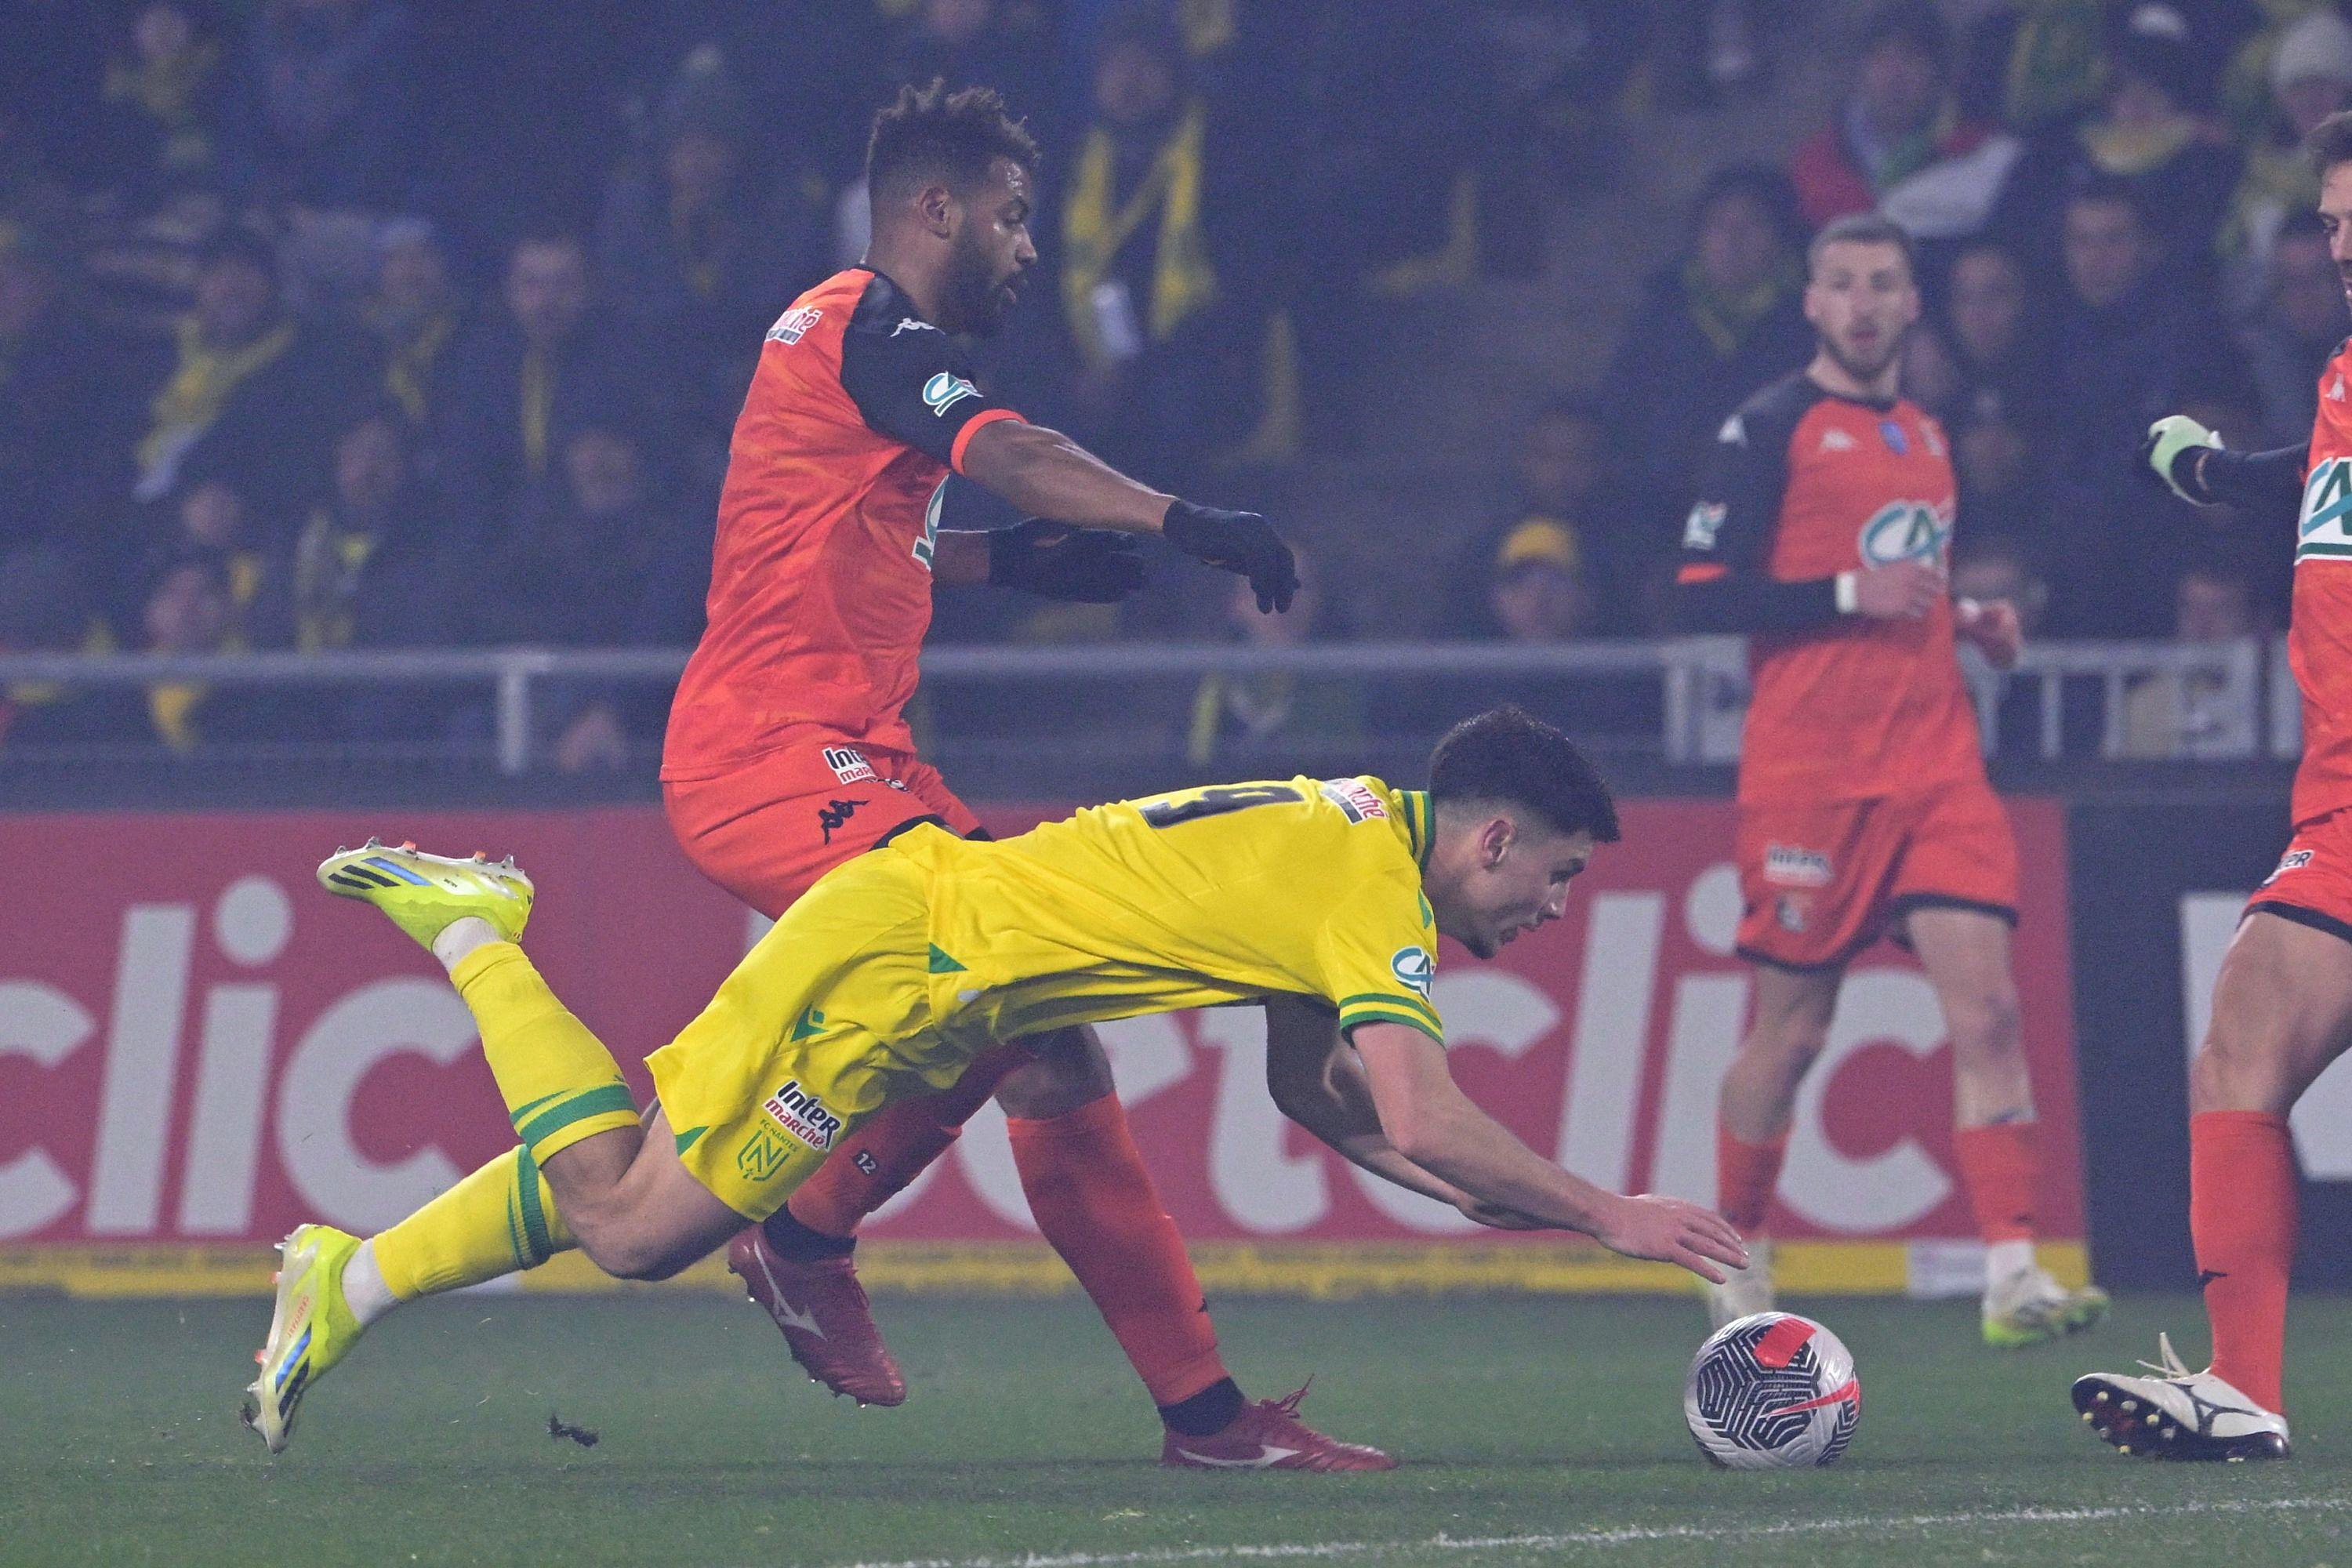 Coupe de France: Nantes took “a lesson in realism” from Laval, admits Gourvennec